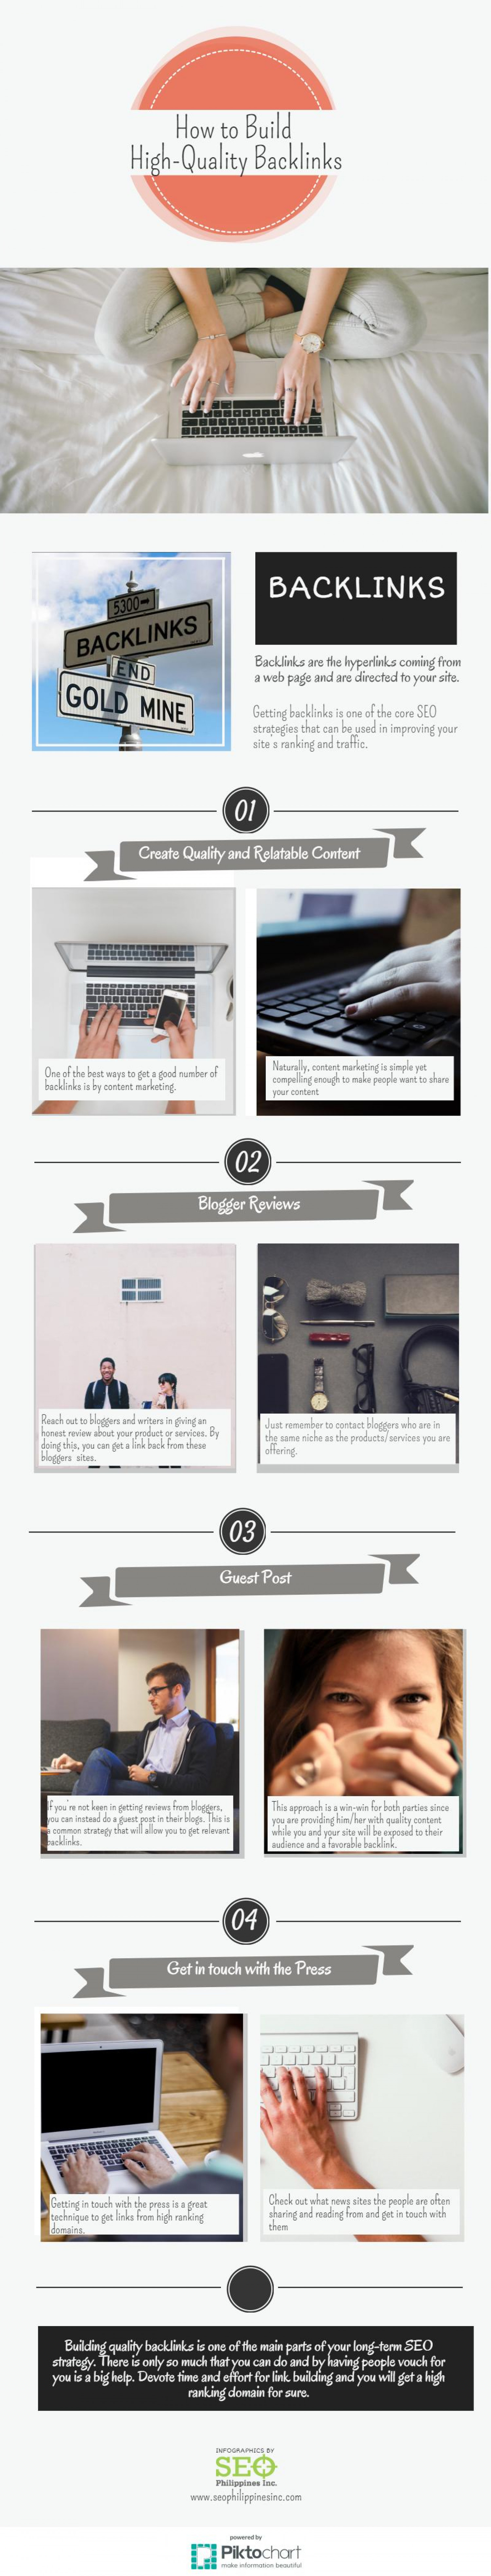 How to build High-Quality Backlinks Infographic